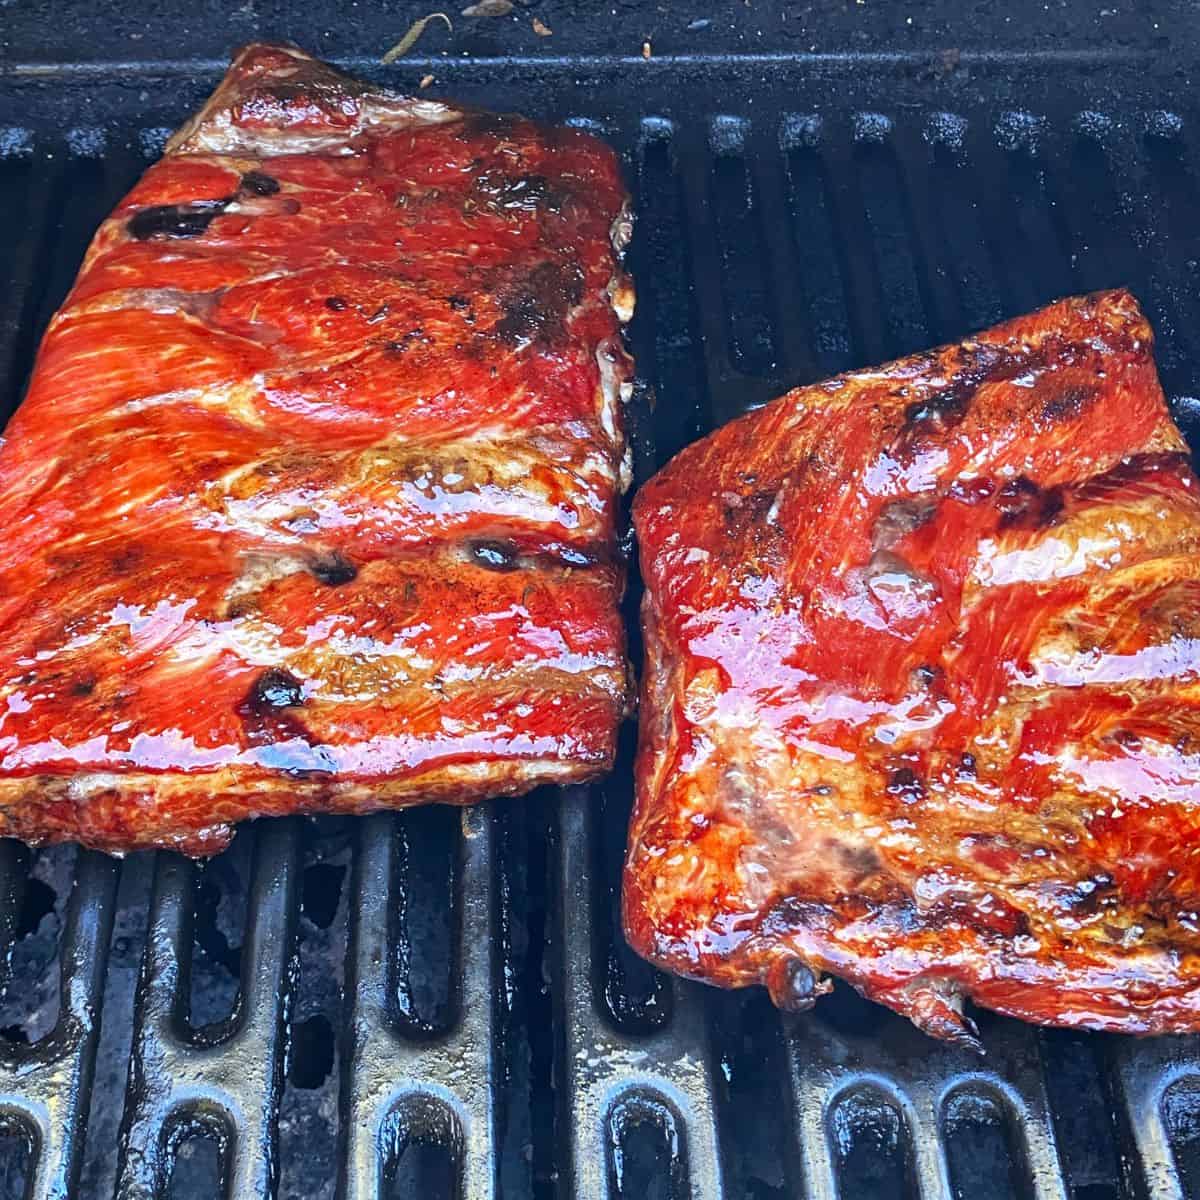 ribs out of smoker and placed on grill to get grill marks